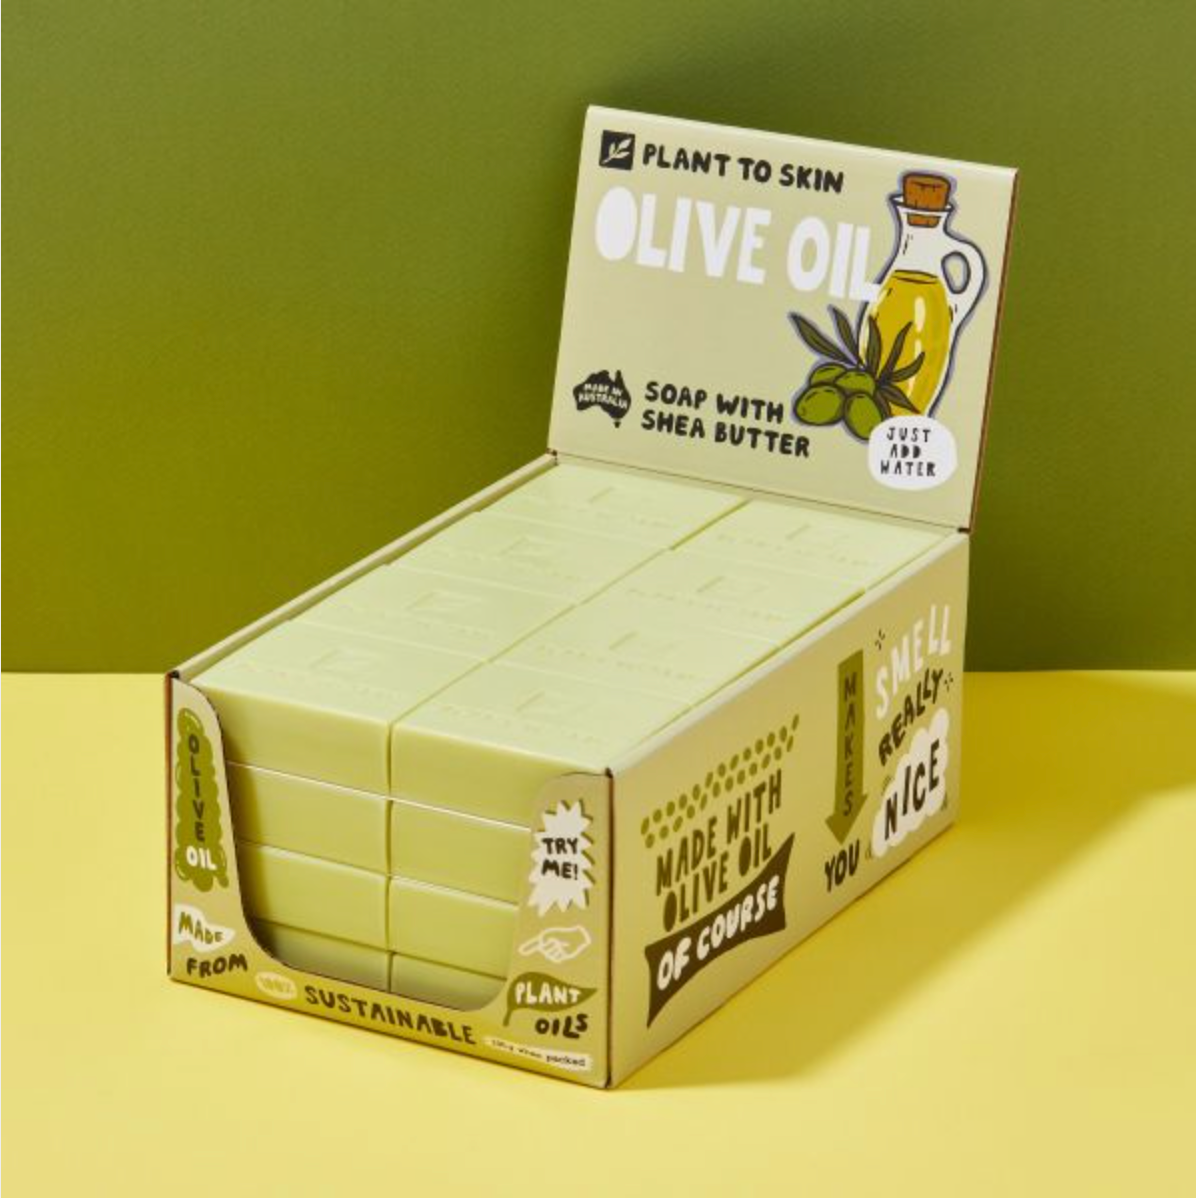 Plant to Skin Olive Soap 32x100g Carton